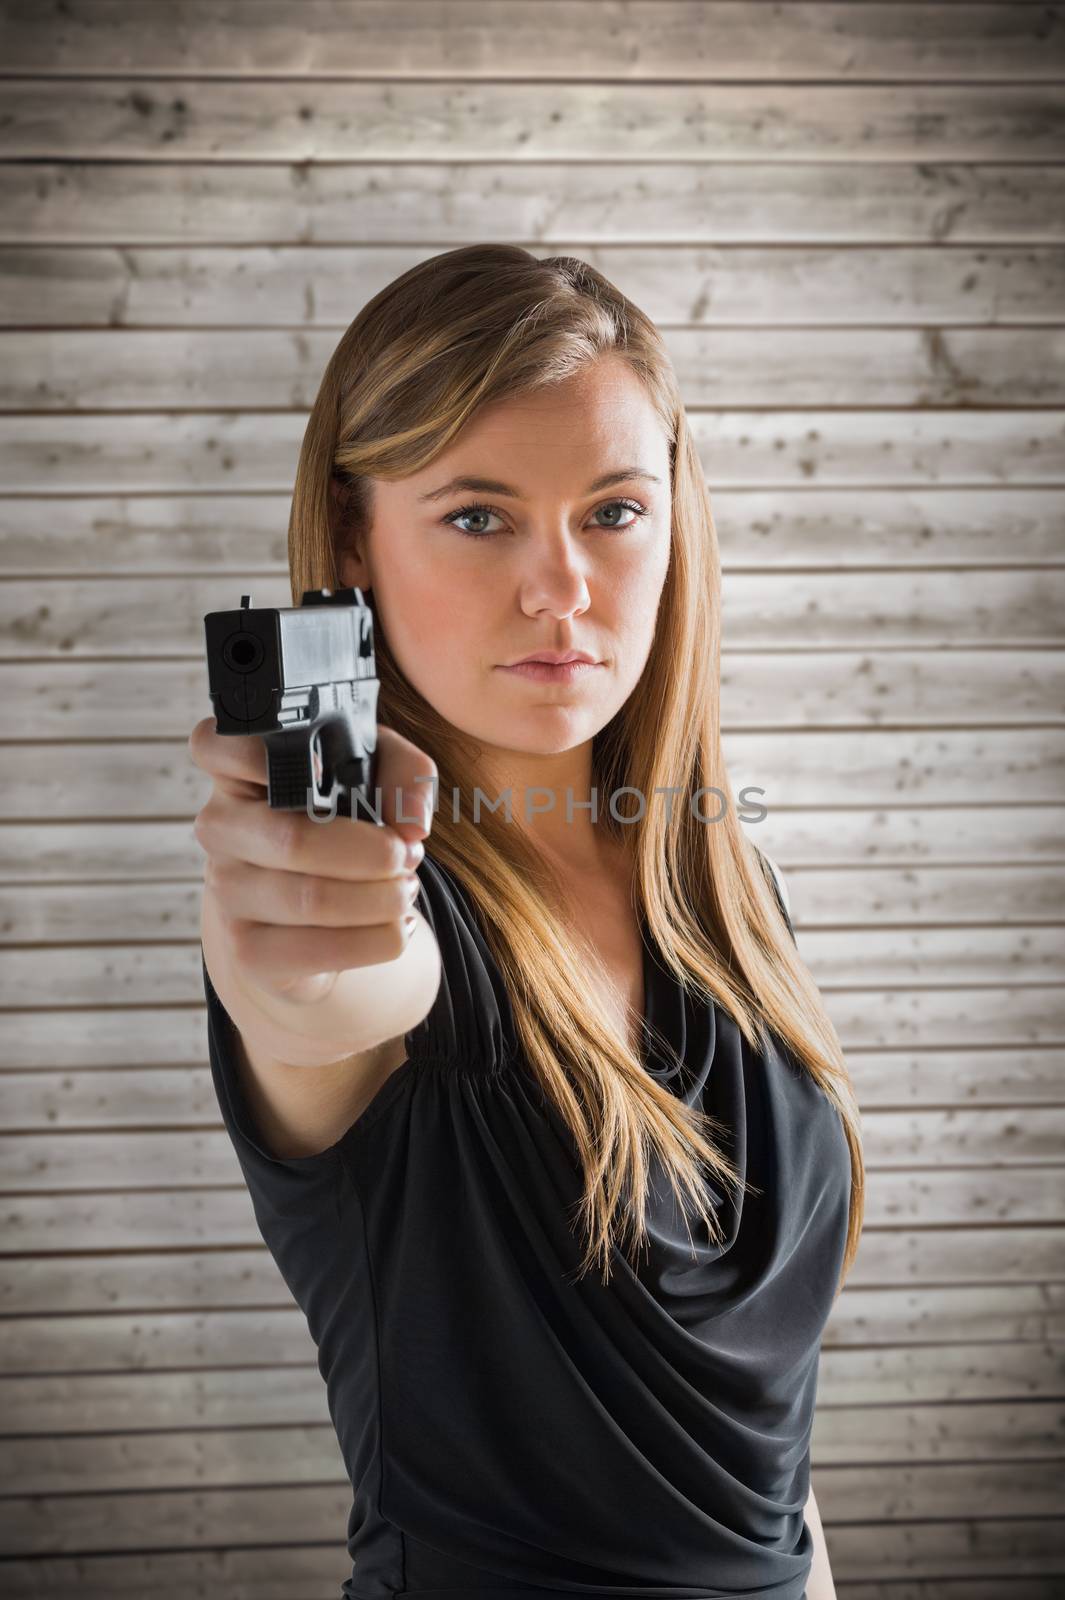 Femme fatale pointing gun at camera against wooden planks background